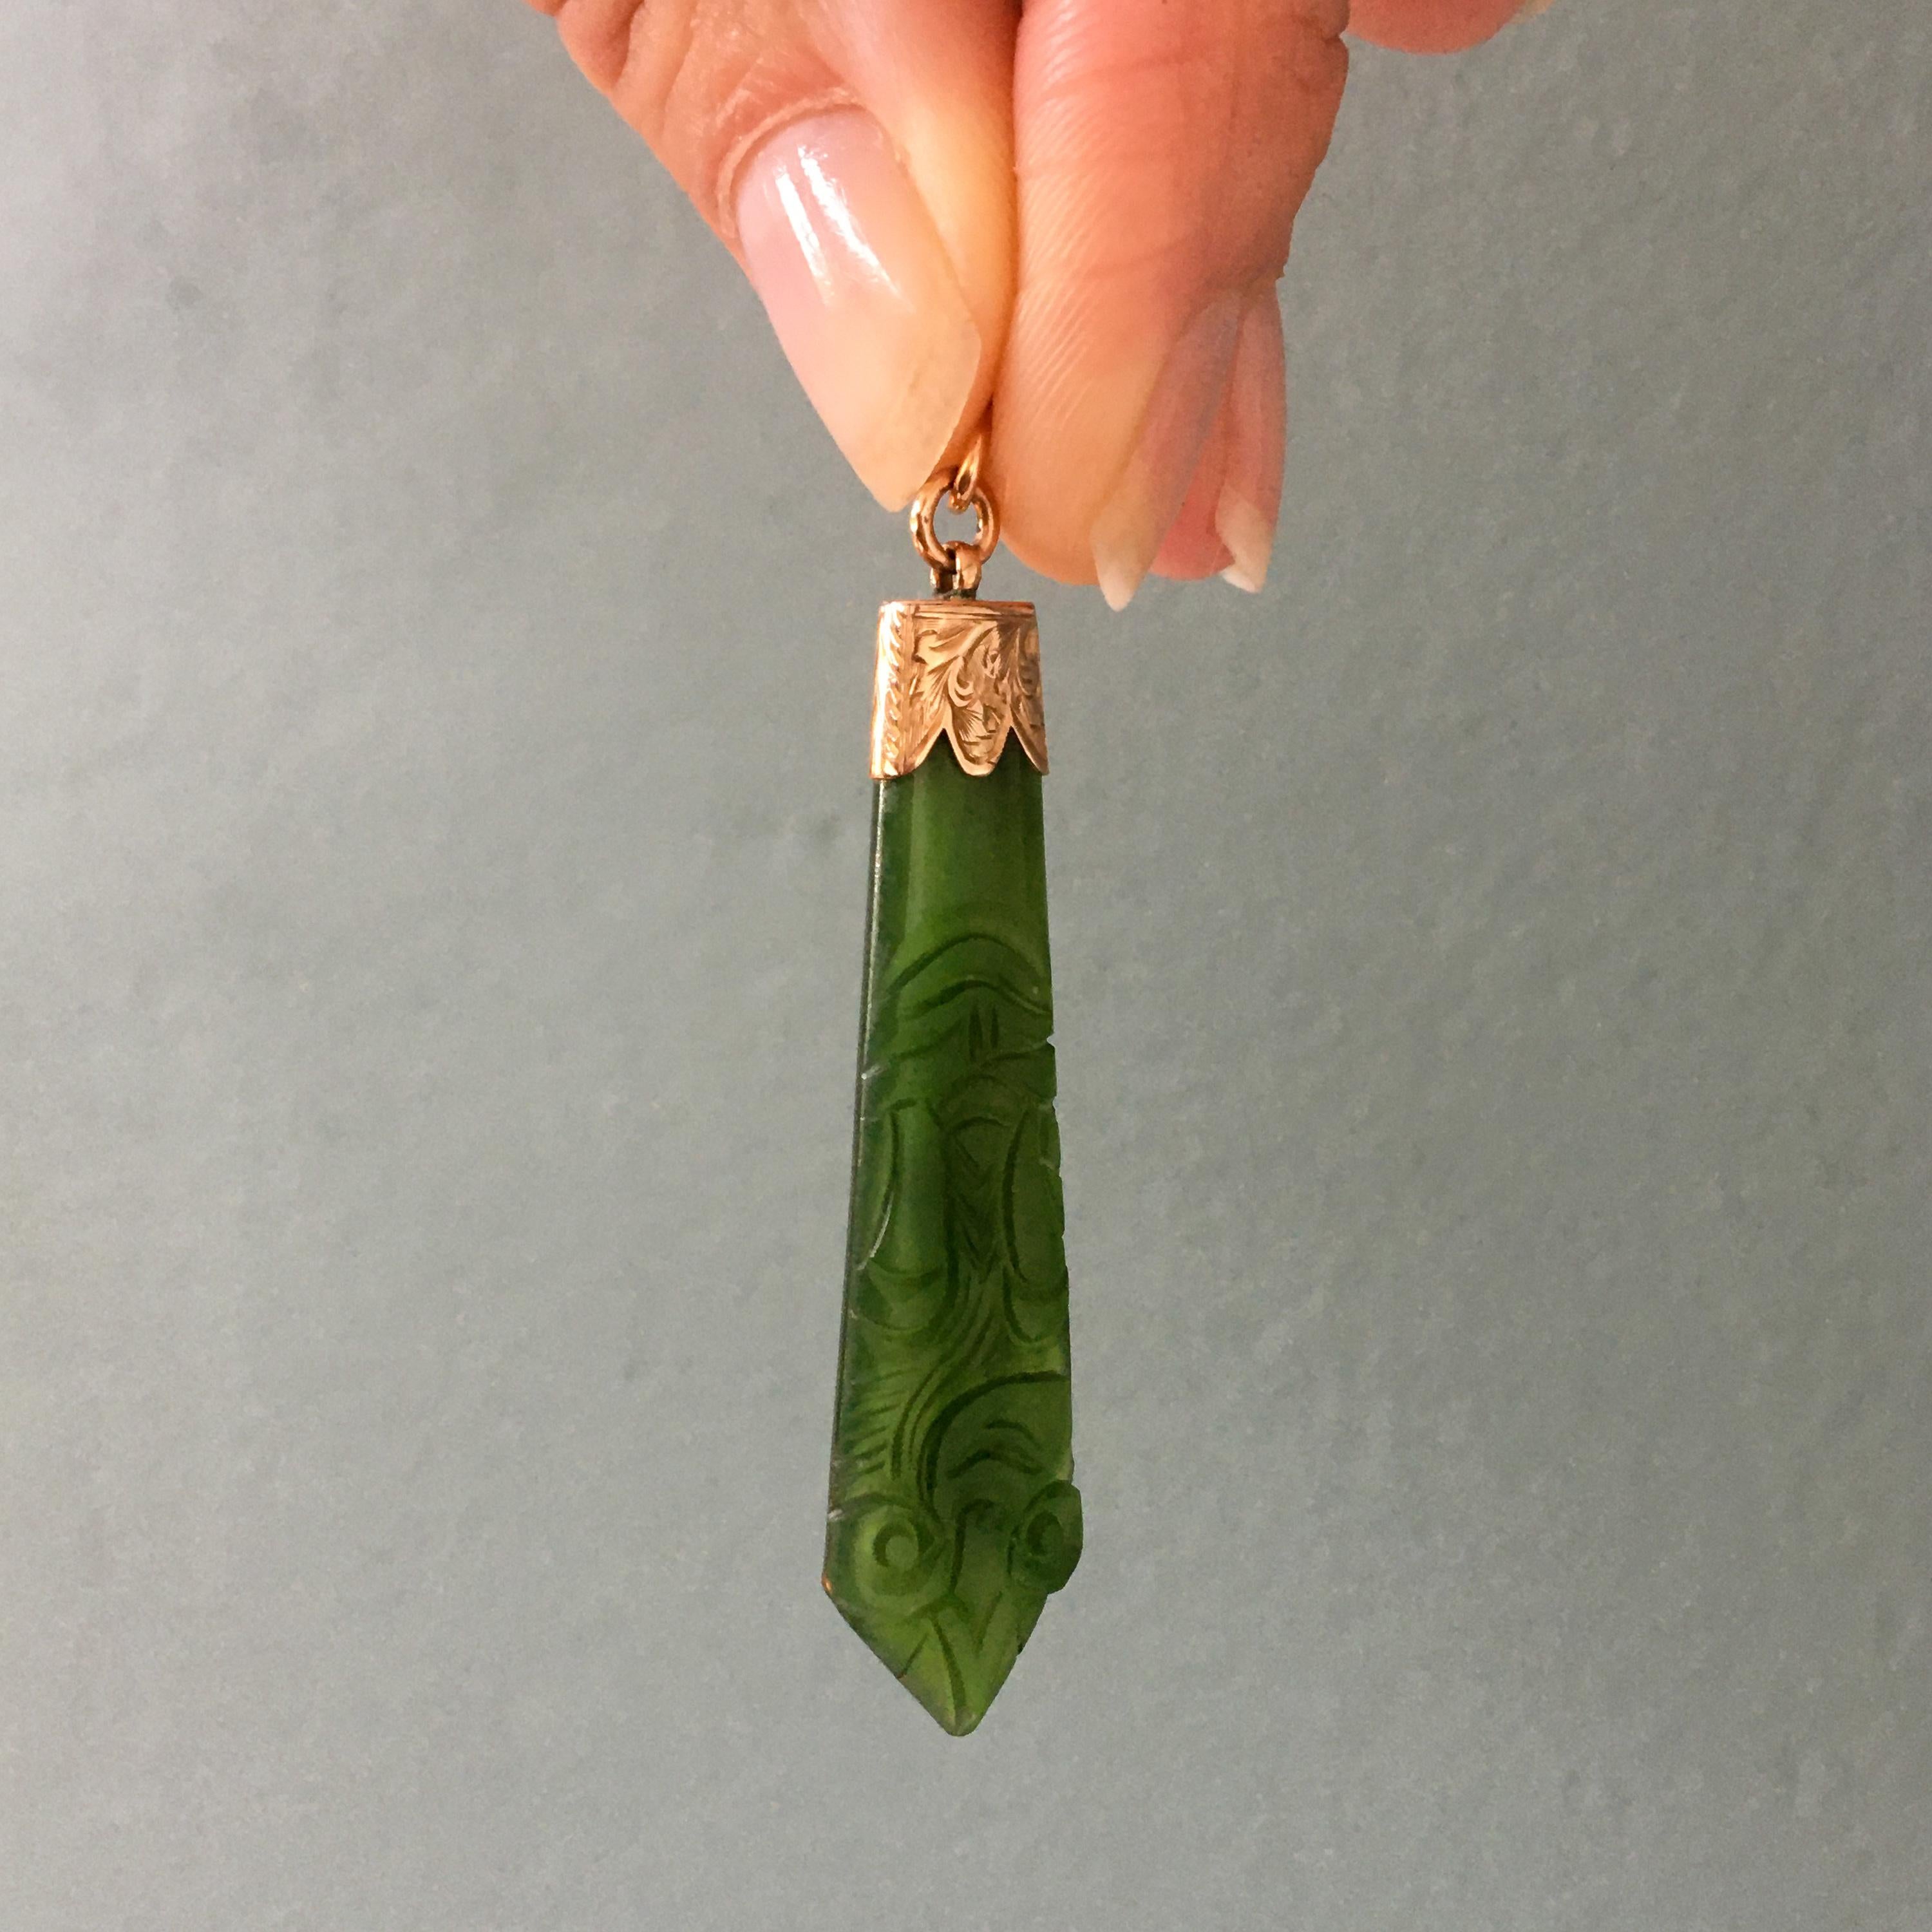 The stone of heaven. Jade carries the energy of the earth and nature, providing a wholesome, nurturing energy that uplifts and soothes the heart. A kite-shaped jade pendant is set in a gold engraved cap. The jade is cut in a super clean, beautiful